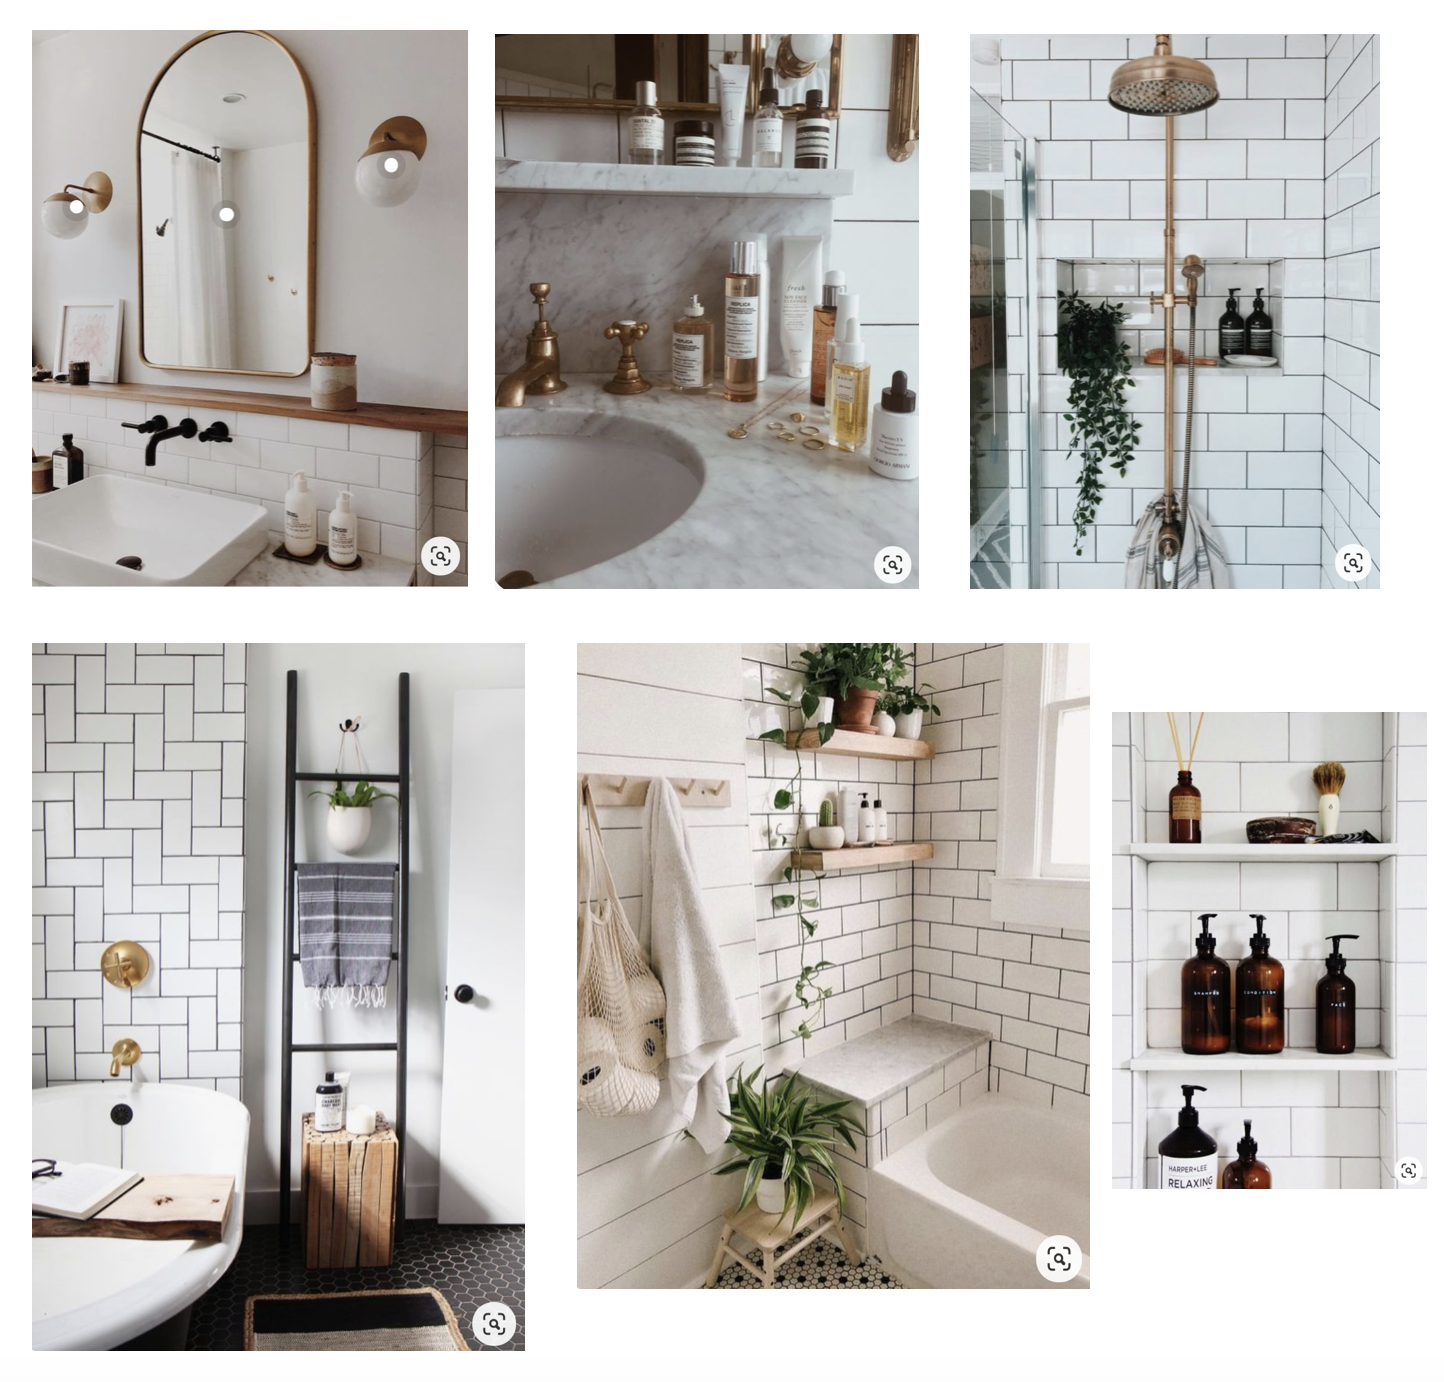 Collage bathroom inspiration Bathroom Renovation - My Vision for the Space and Sconces #bathroom #bathroominspiration #moodboard #design #home #interiorinspiration #decor #bathroominspo #remodel #bathroomremodel #simoneathome